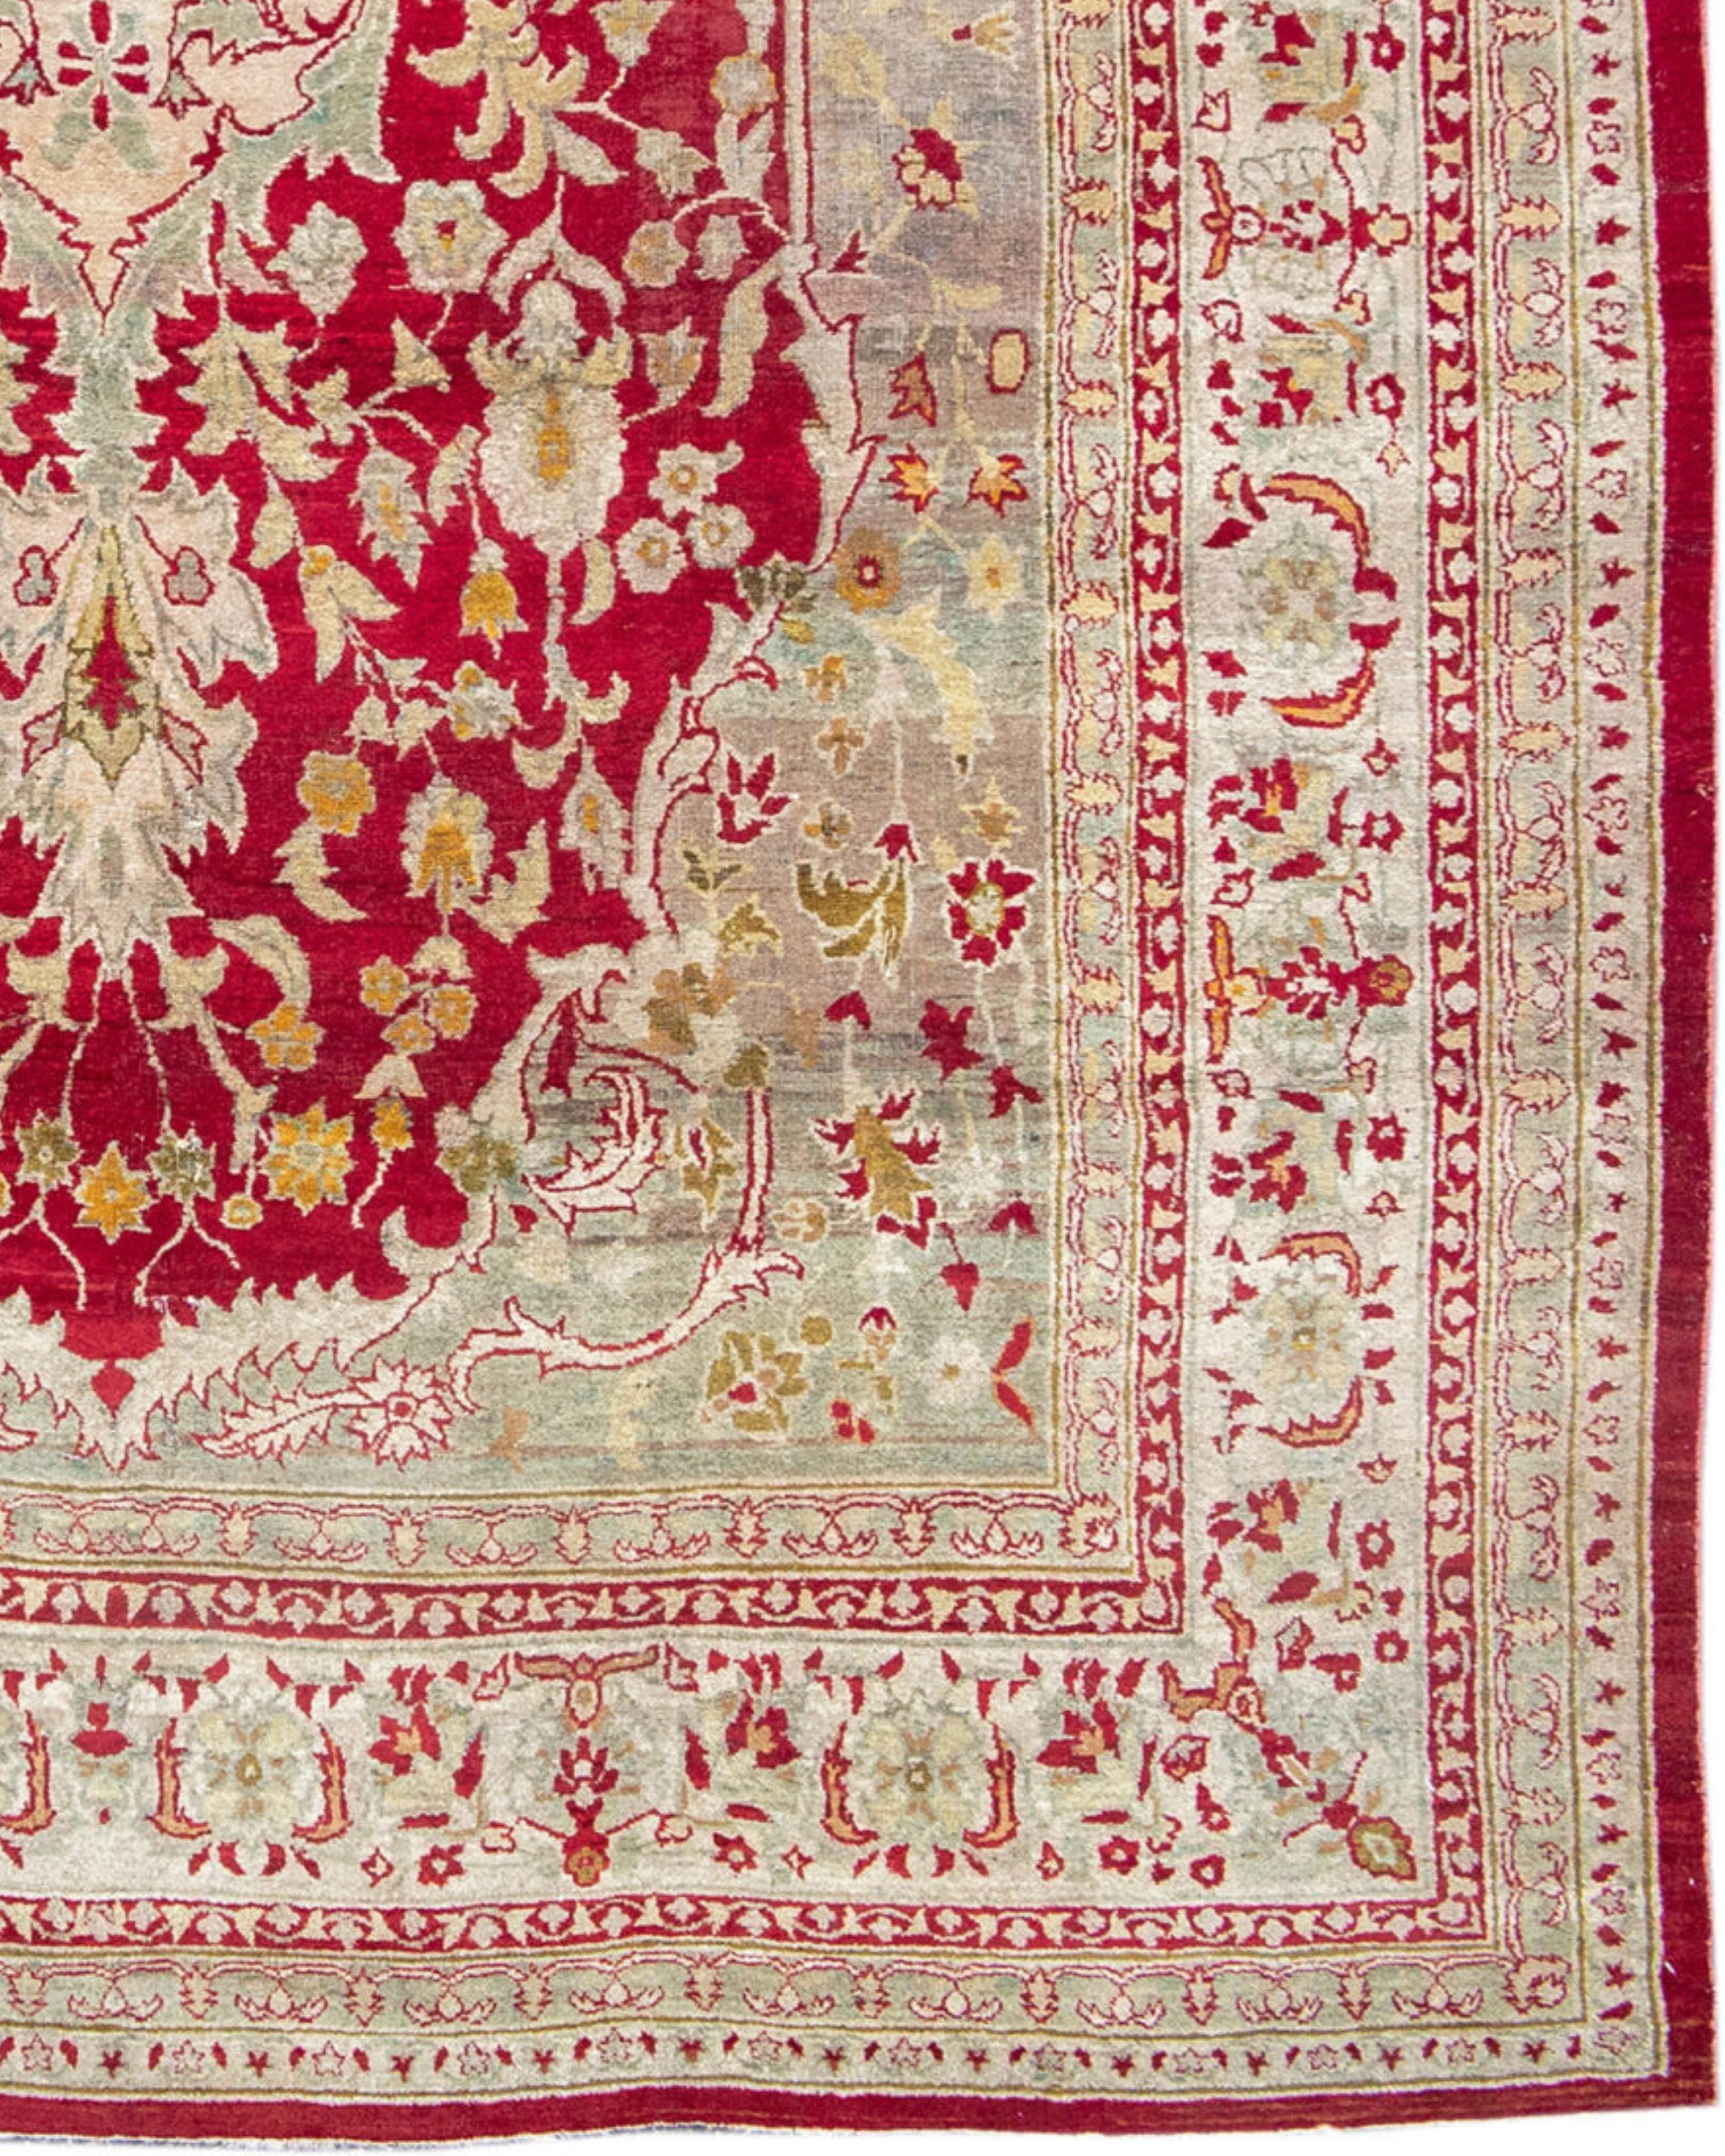 Antique Red and Gold Indian Agra Carpet, Late 19th Century

Additional Information:
Dimensions: 8'9